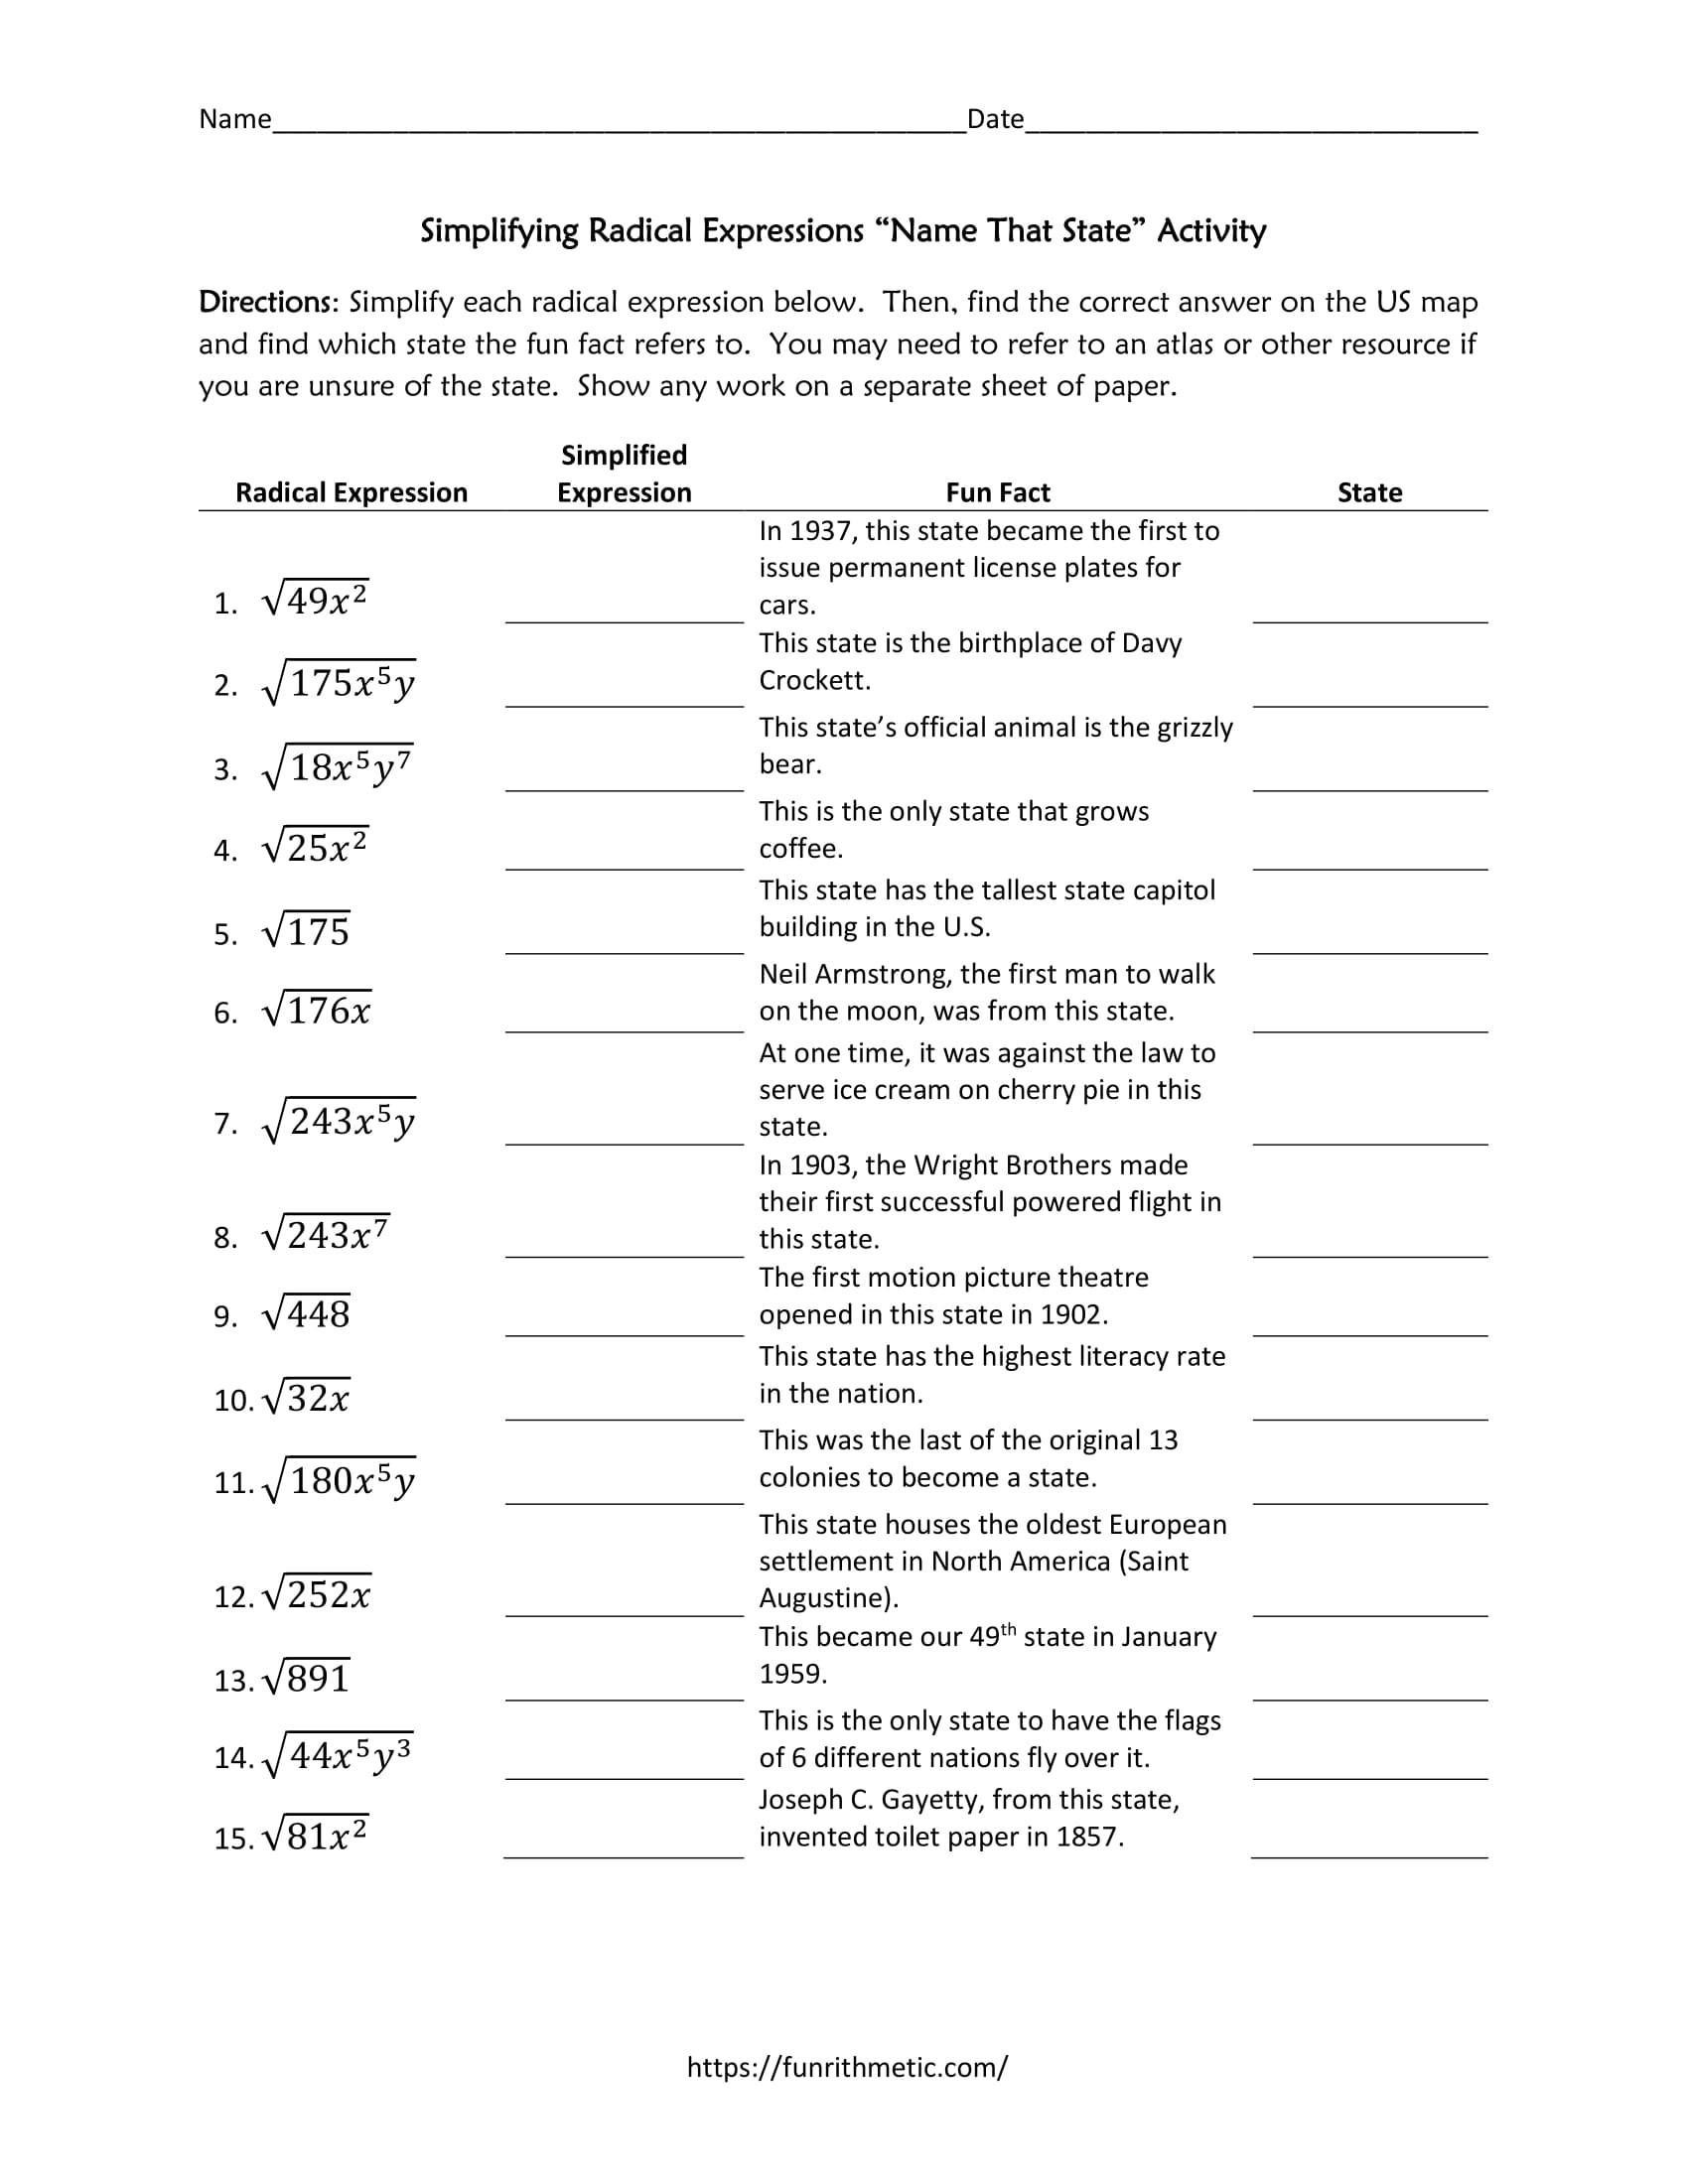 Simplifying Radicals Practice Worksheet Simplifying Radical Expressions &quot;name that State&quot; Cross